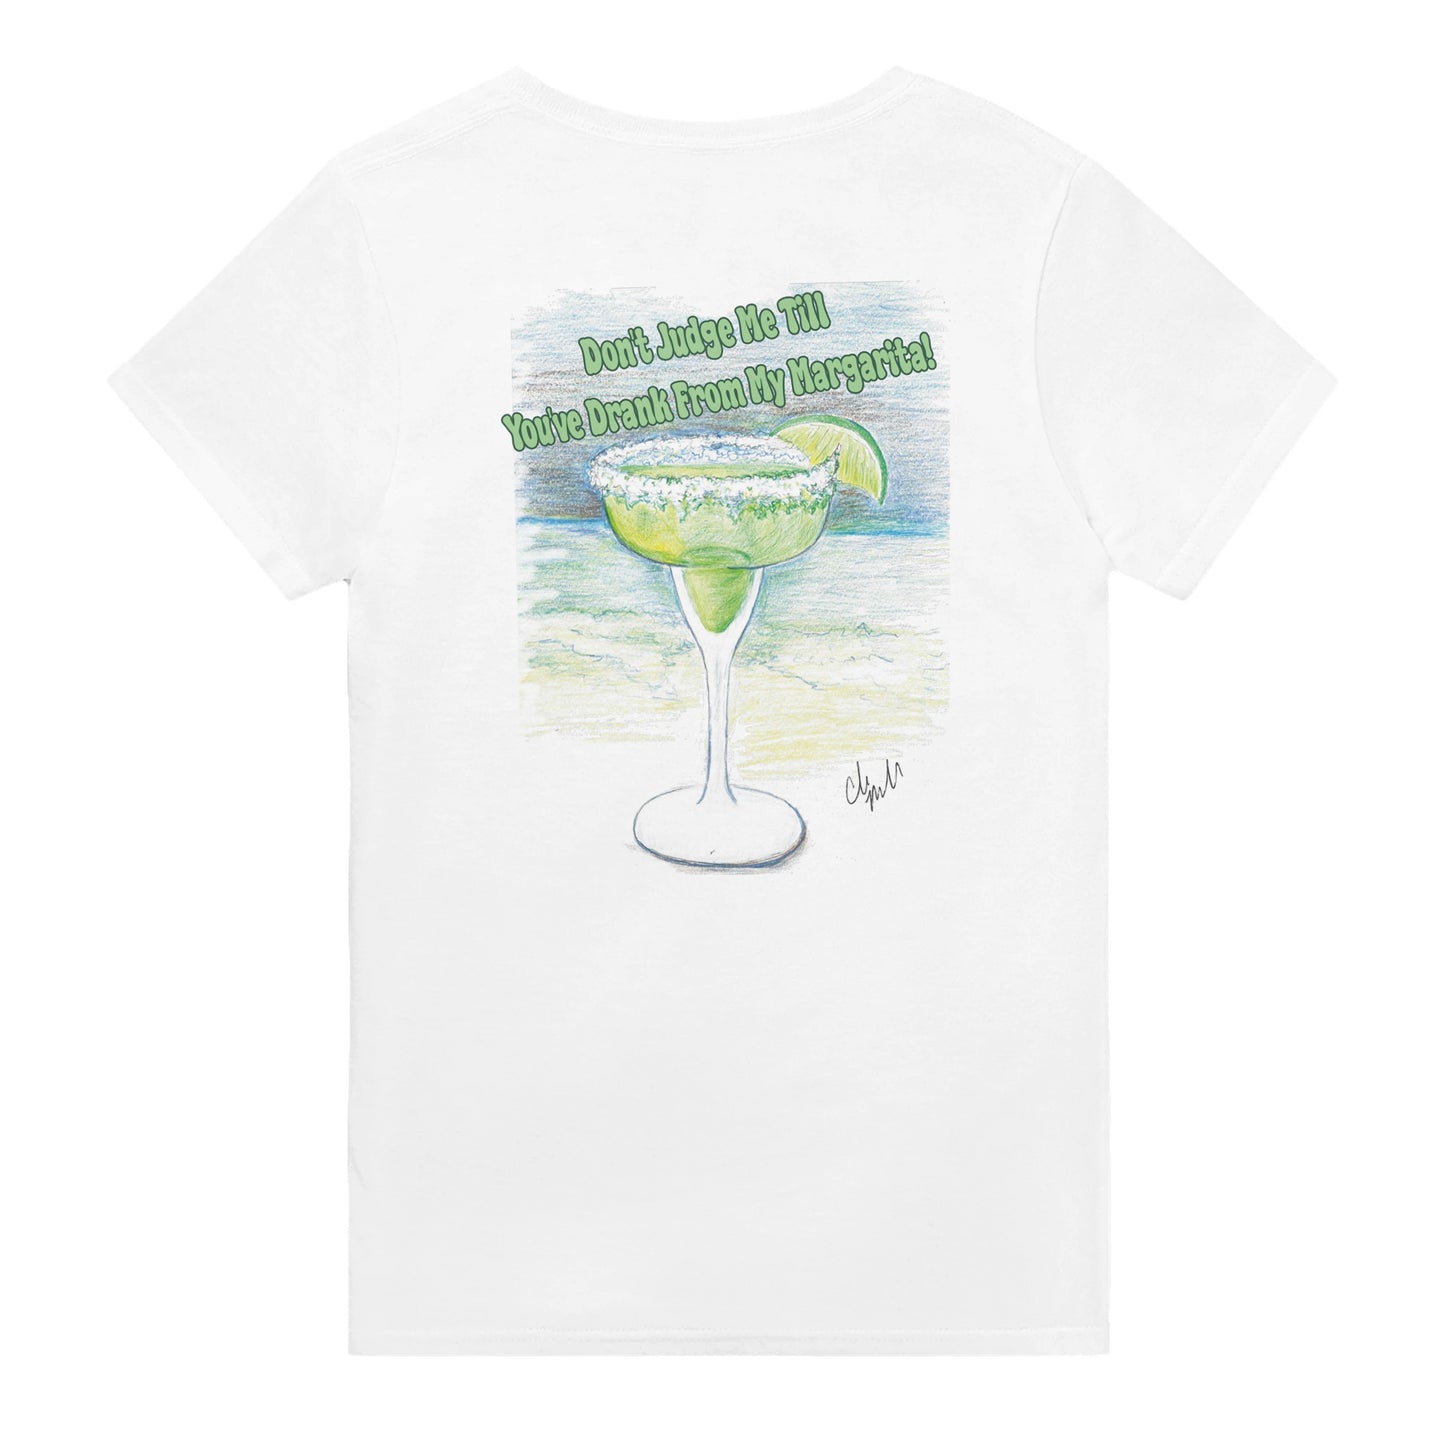 A white WhatYa Say heavyweight Unisex Crewneck t-shirt with original artwork and motto Don’t Judge Me Till You’ve Drank from my margarita on back of t-shirt from WhatYa Say Apparel.